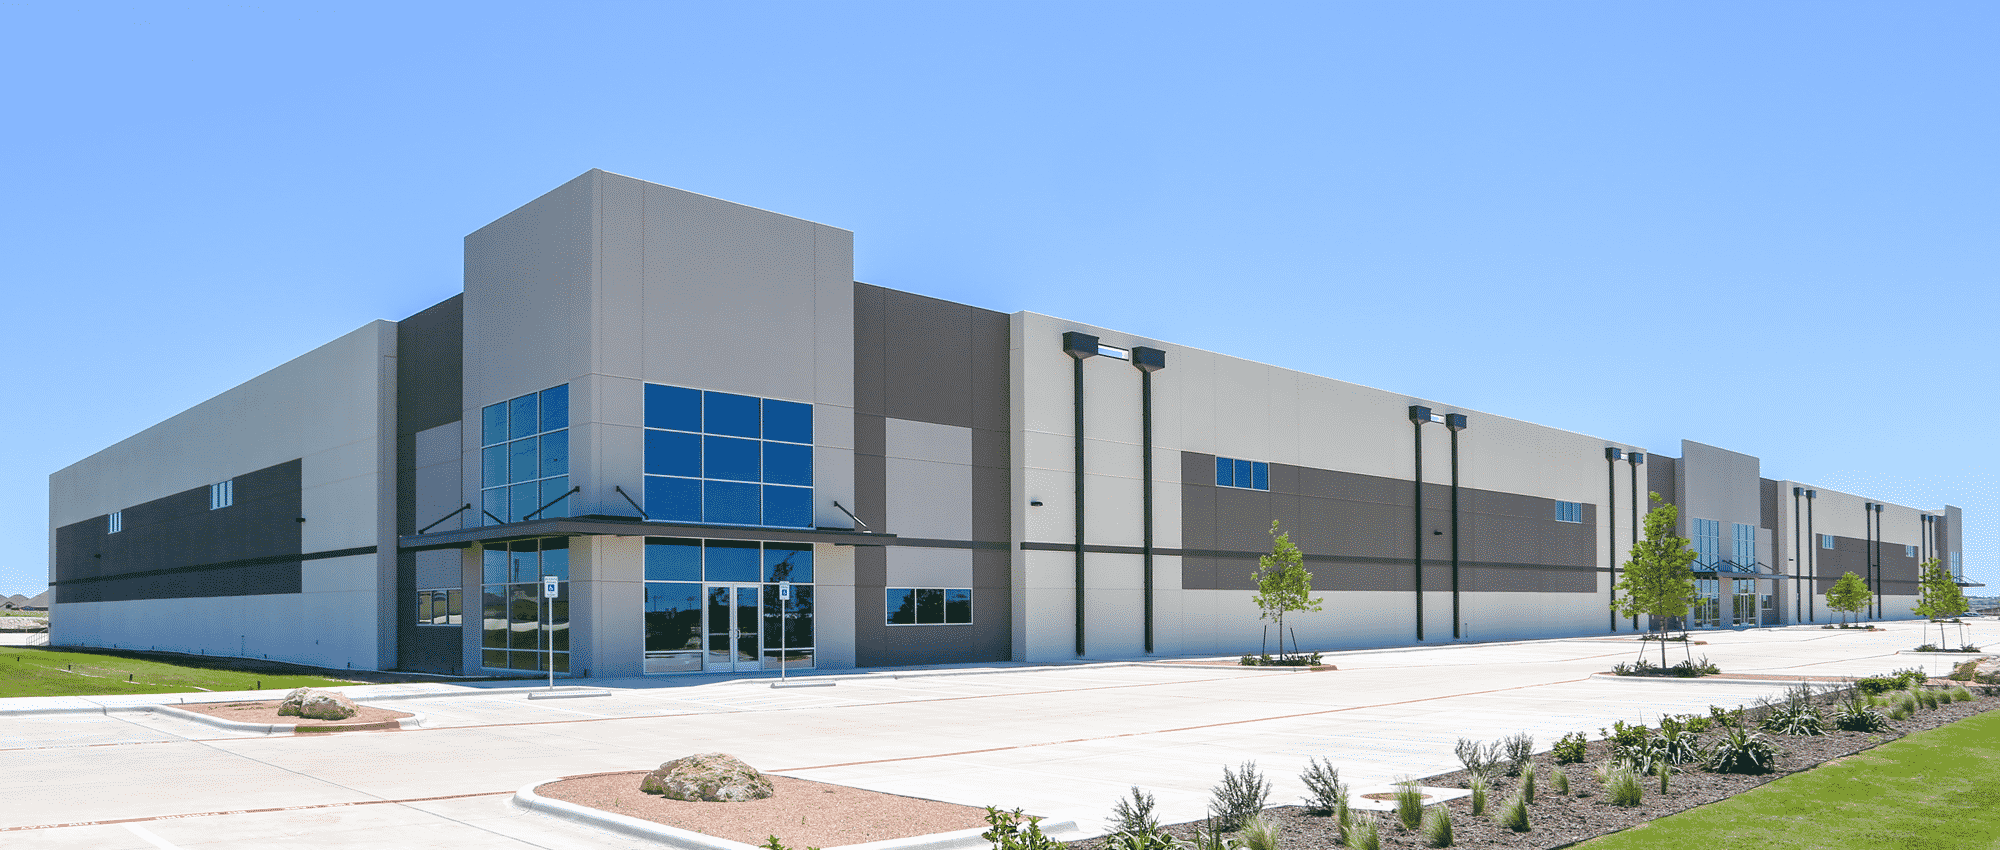 hutto industrial leases 2020